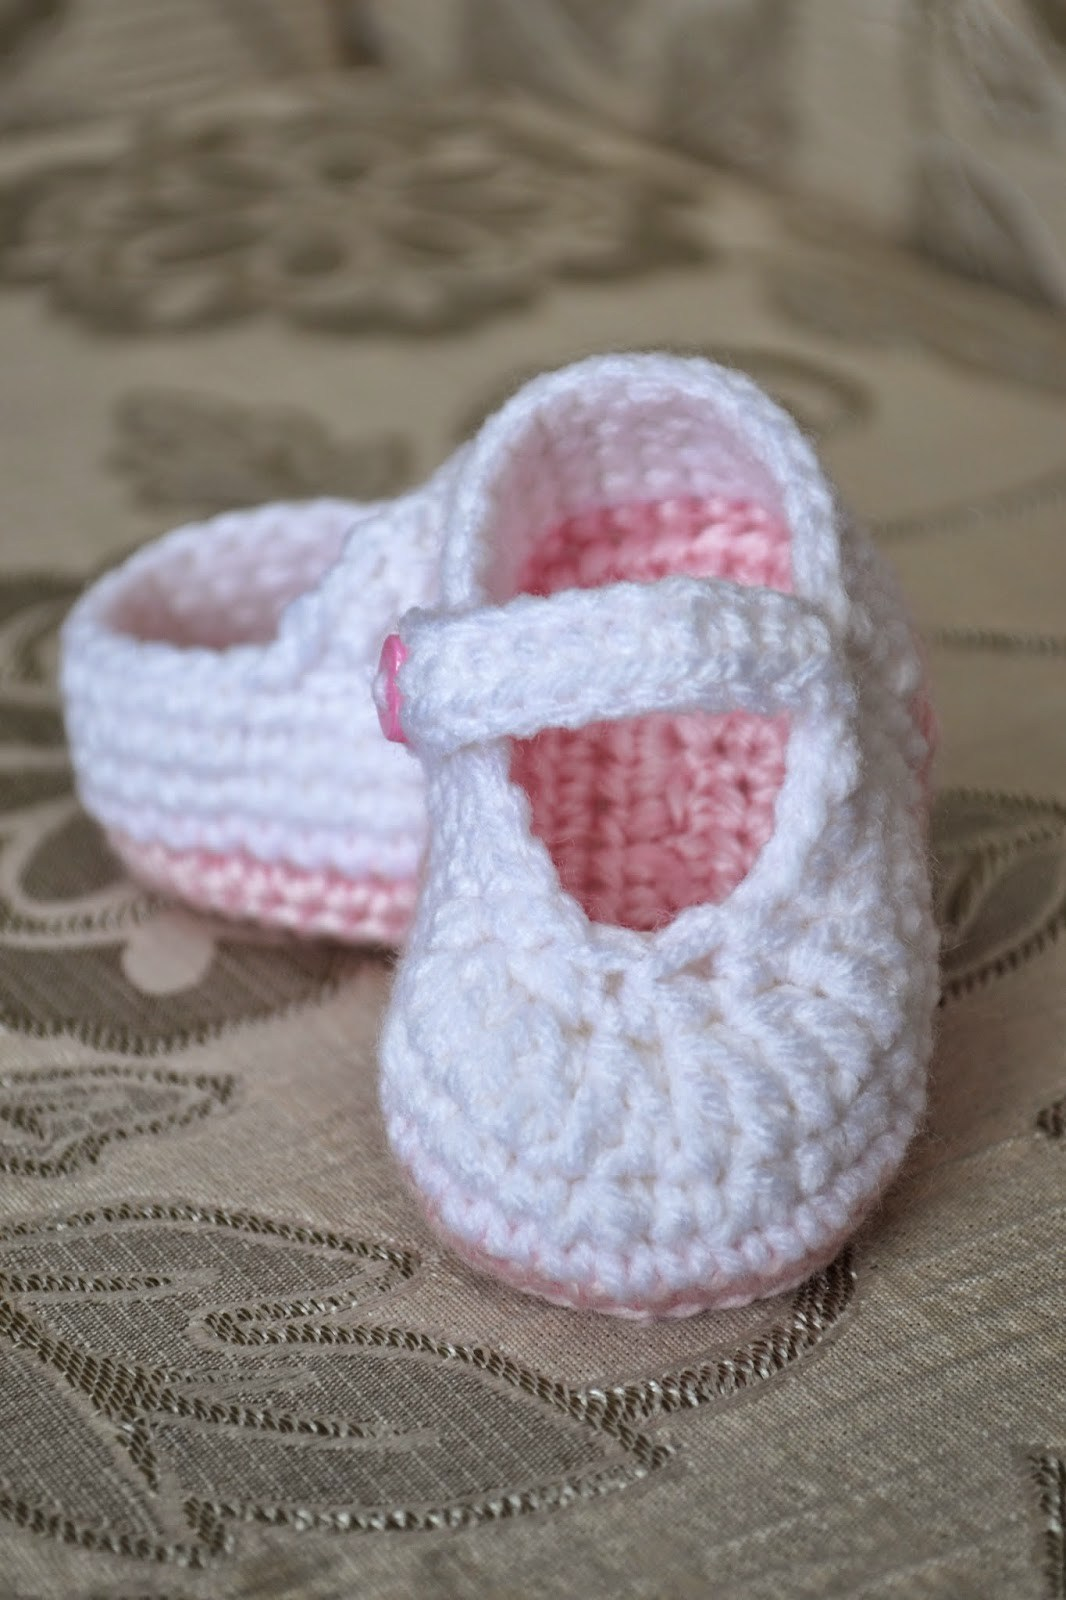 Converse Knitted Slippers Pattern Crochet Slipper Patterns Knitting Note Cards Crochet Patterns